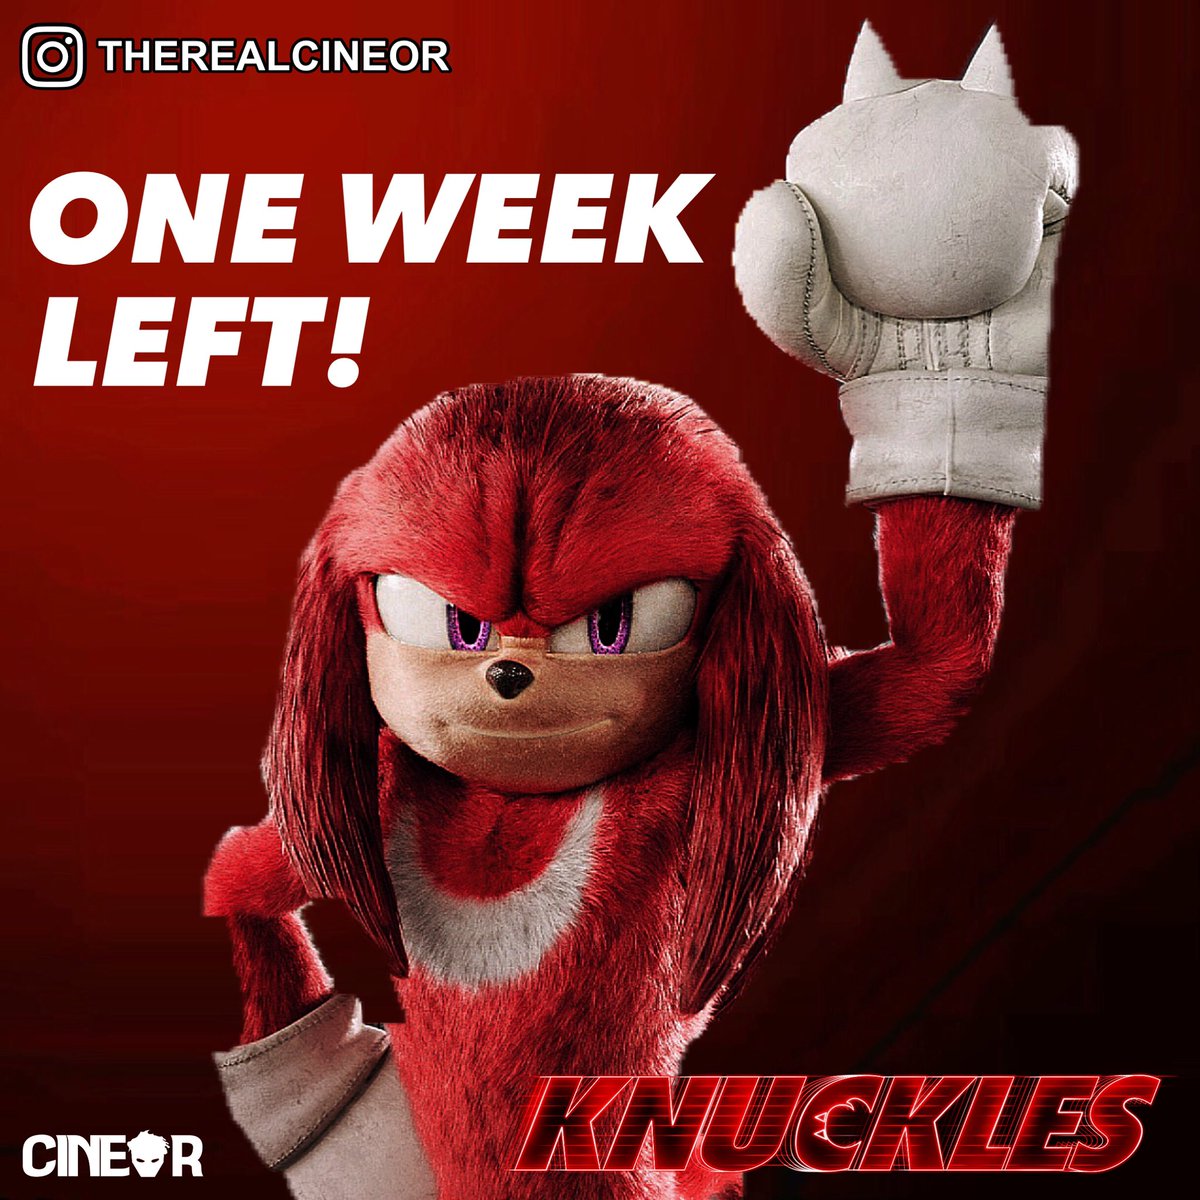 One Week Left until the #knuckles Series release on Paramount+ streaming all 6 episodes! Don’t miss it! 👀😆🥊🔥

#Knucklesseries #ParamountPlus #SonicMovie3 #sonicmovie #sonicthehdgehog #paramountpictures